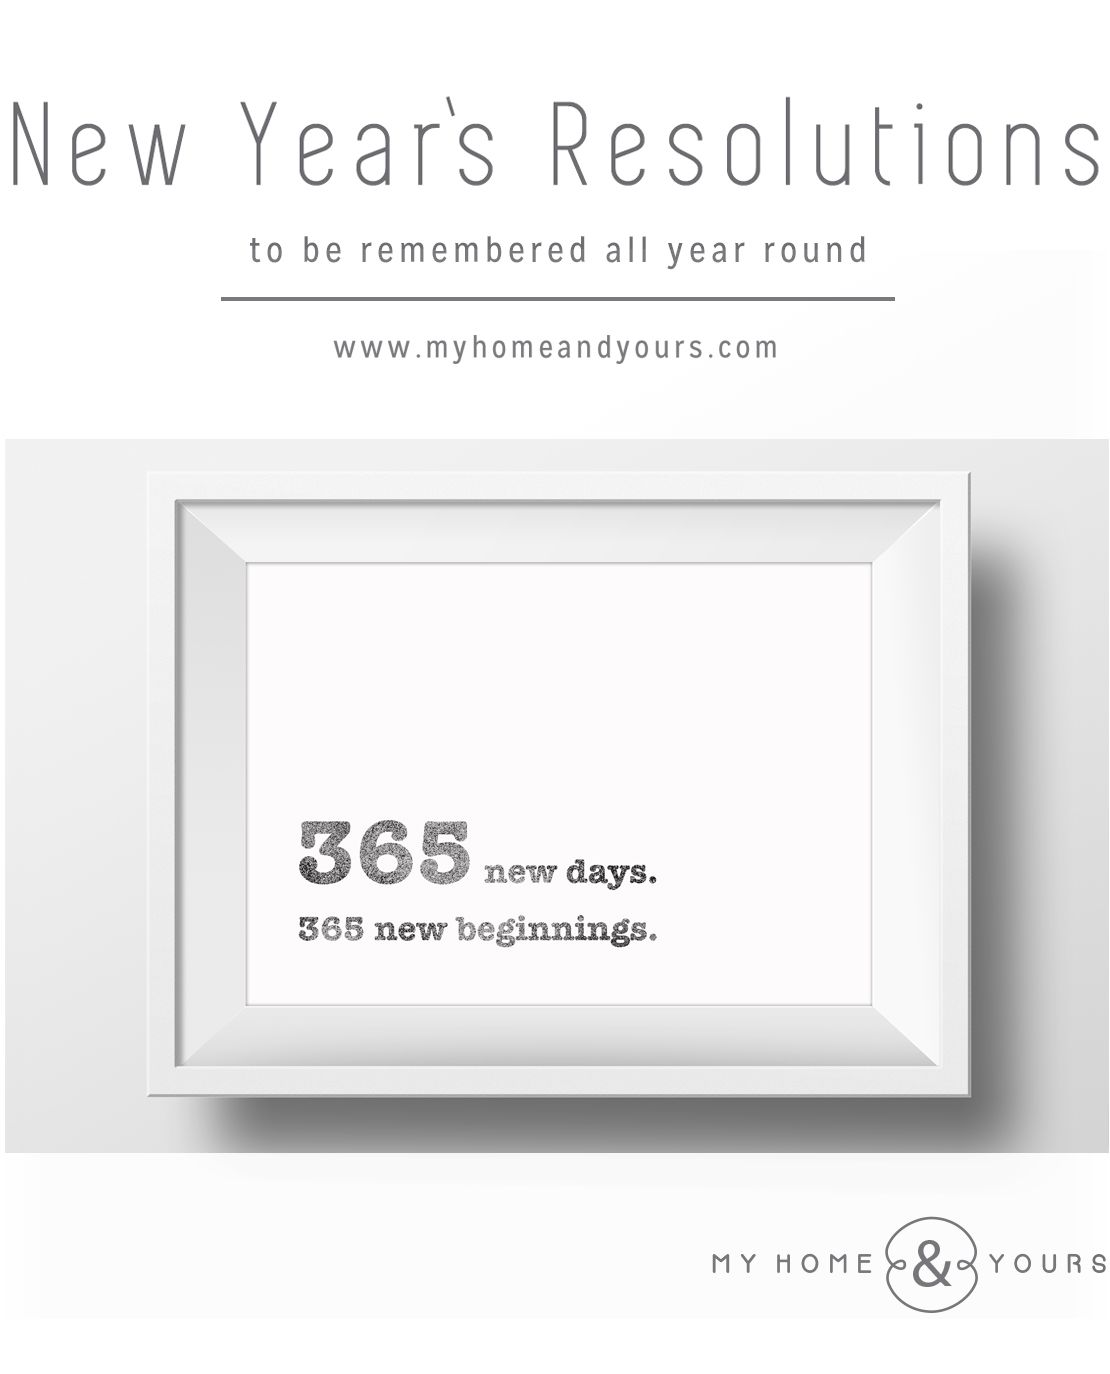 New-Years-Resolutions---to-be-remembered-all-year-round-by-my-home-and-yours-blog